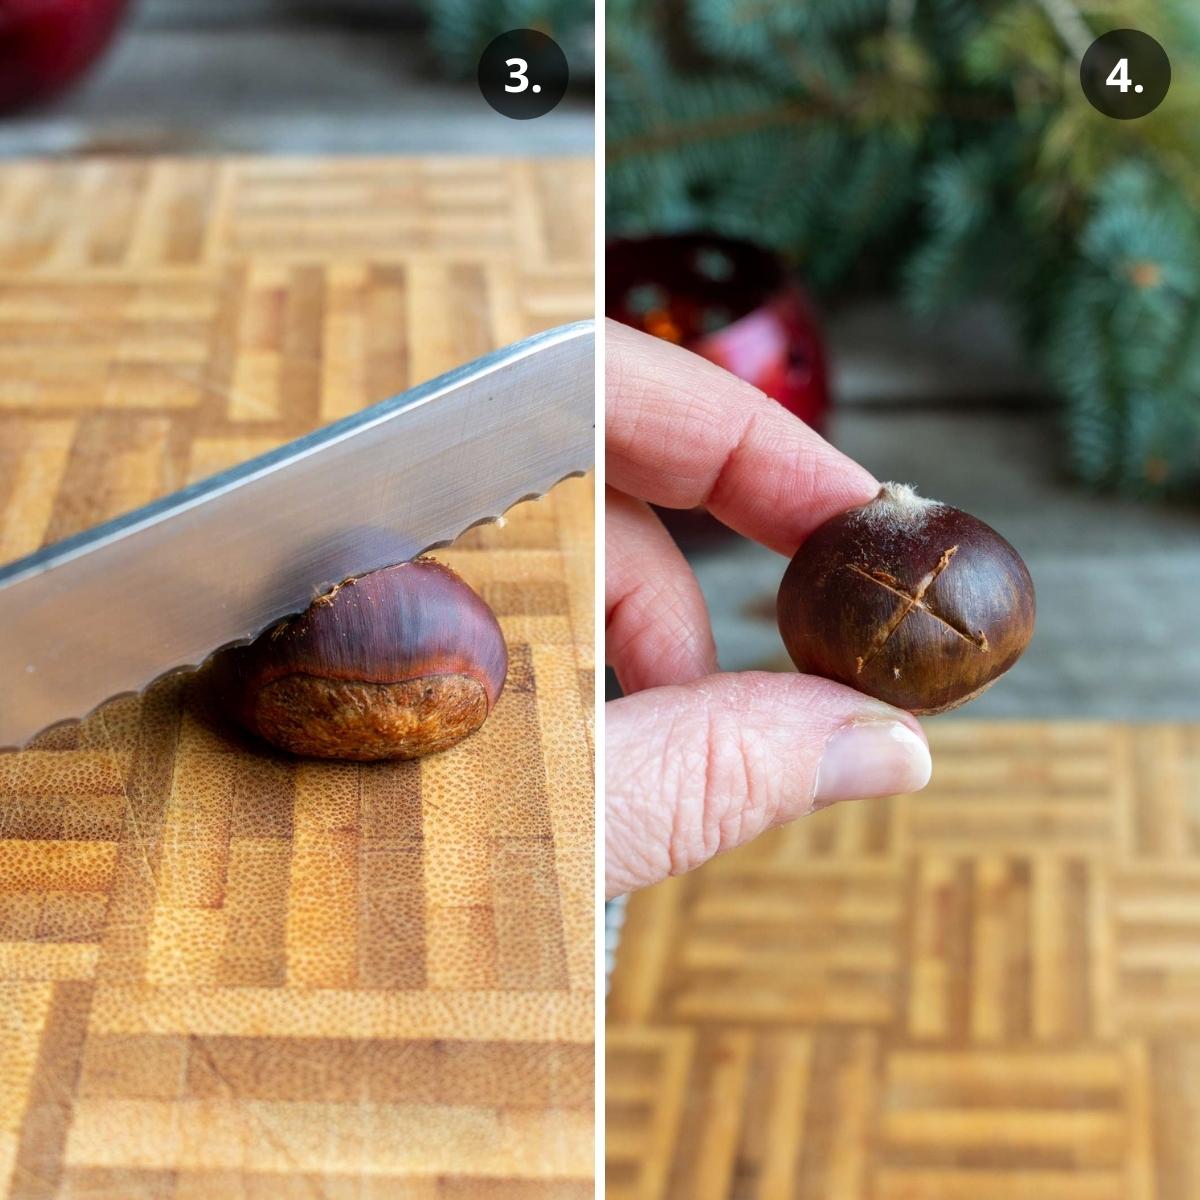 Scoring the chestnut with knife with and "x".